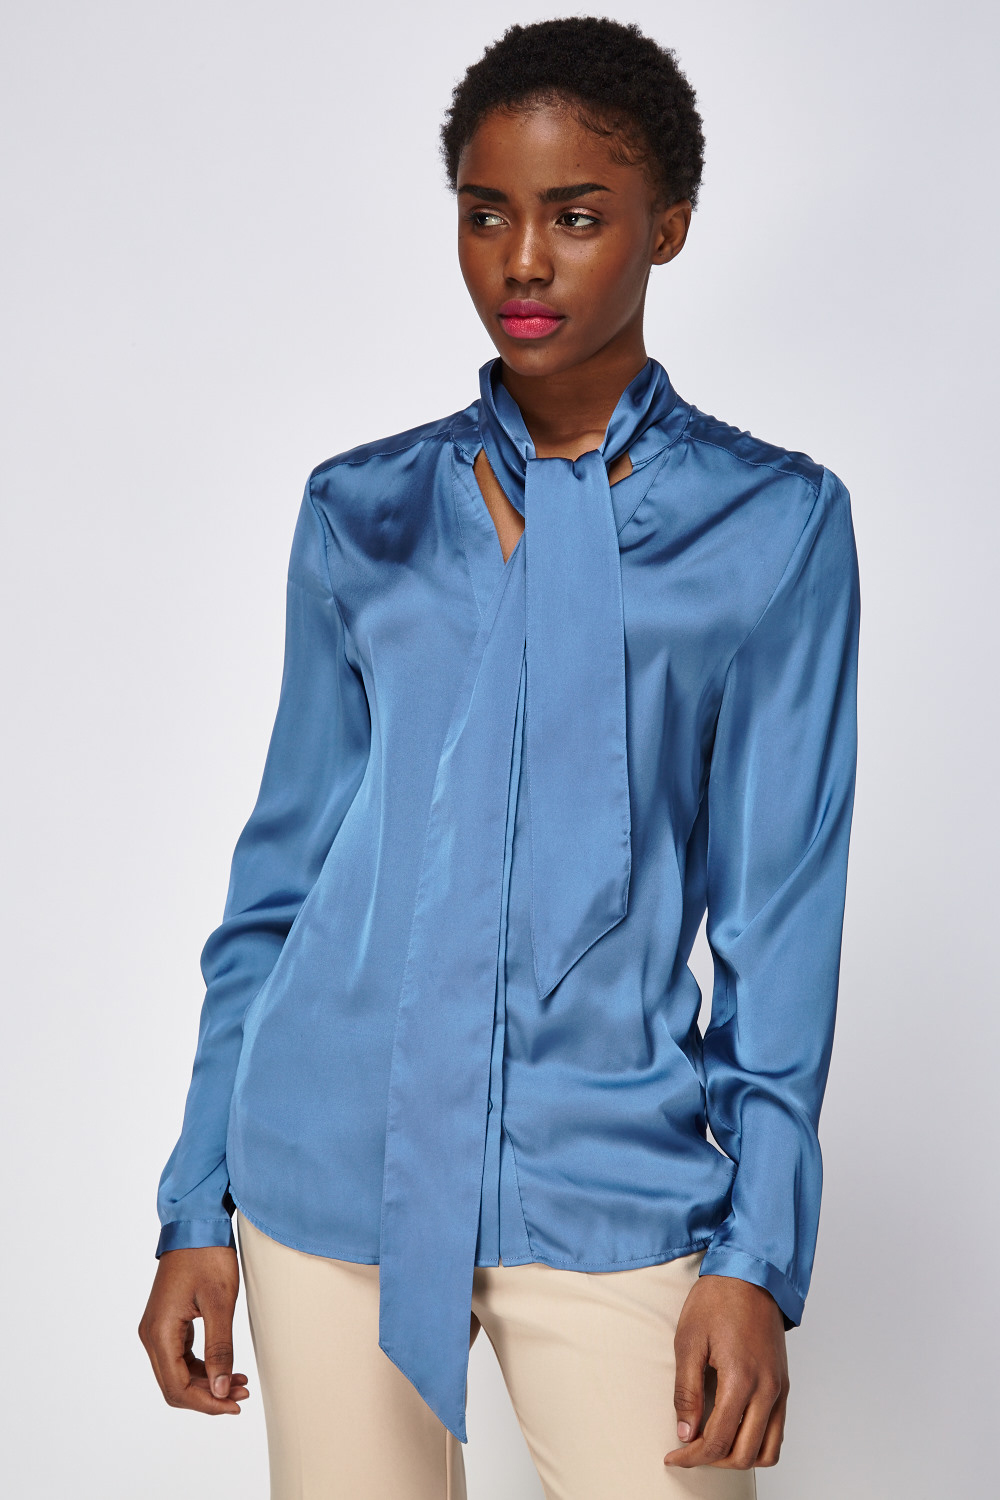 Tie Up Neck Silky Shirt - Just $7